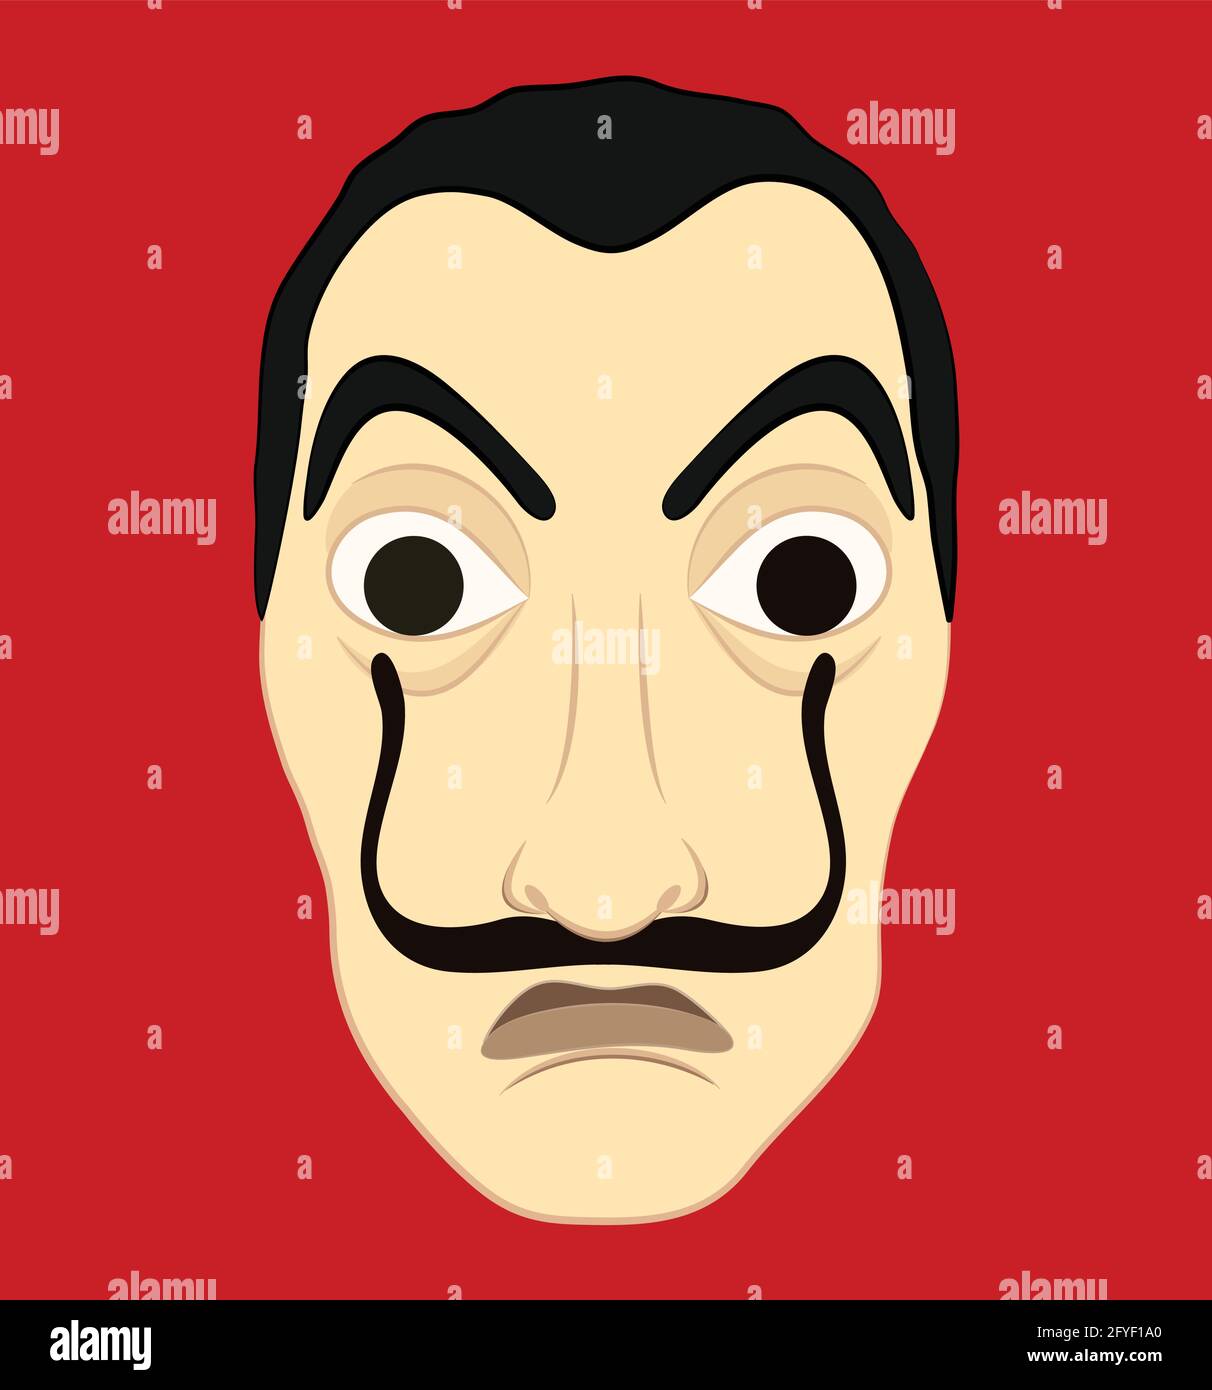 Man with Mustache Face Vector illustration isolated on red background. Mask vector graphic. Stock Vector